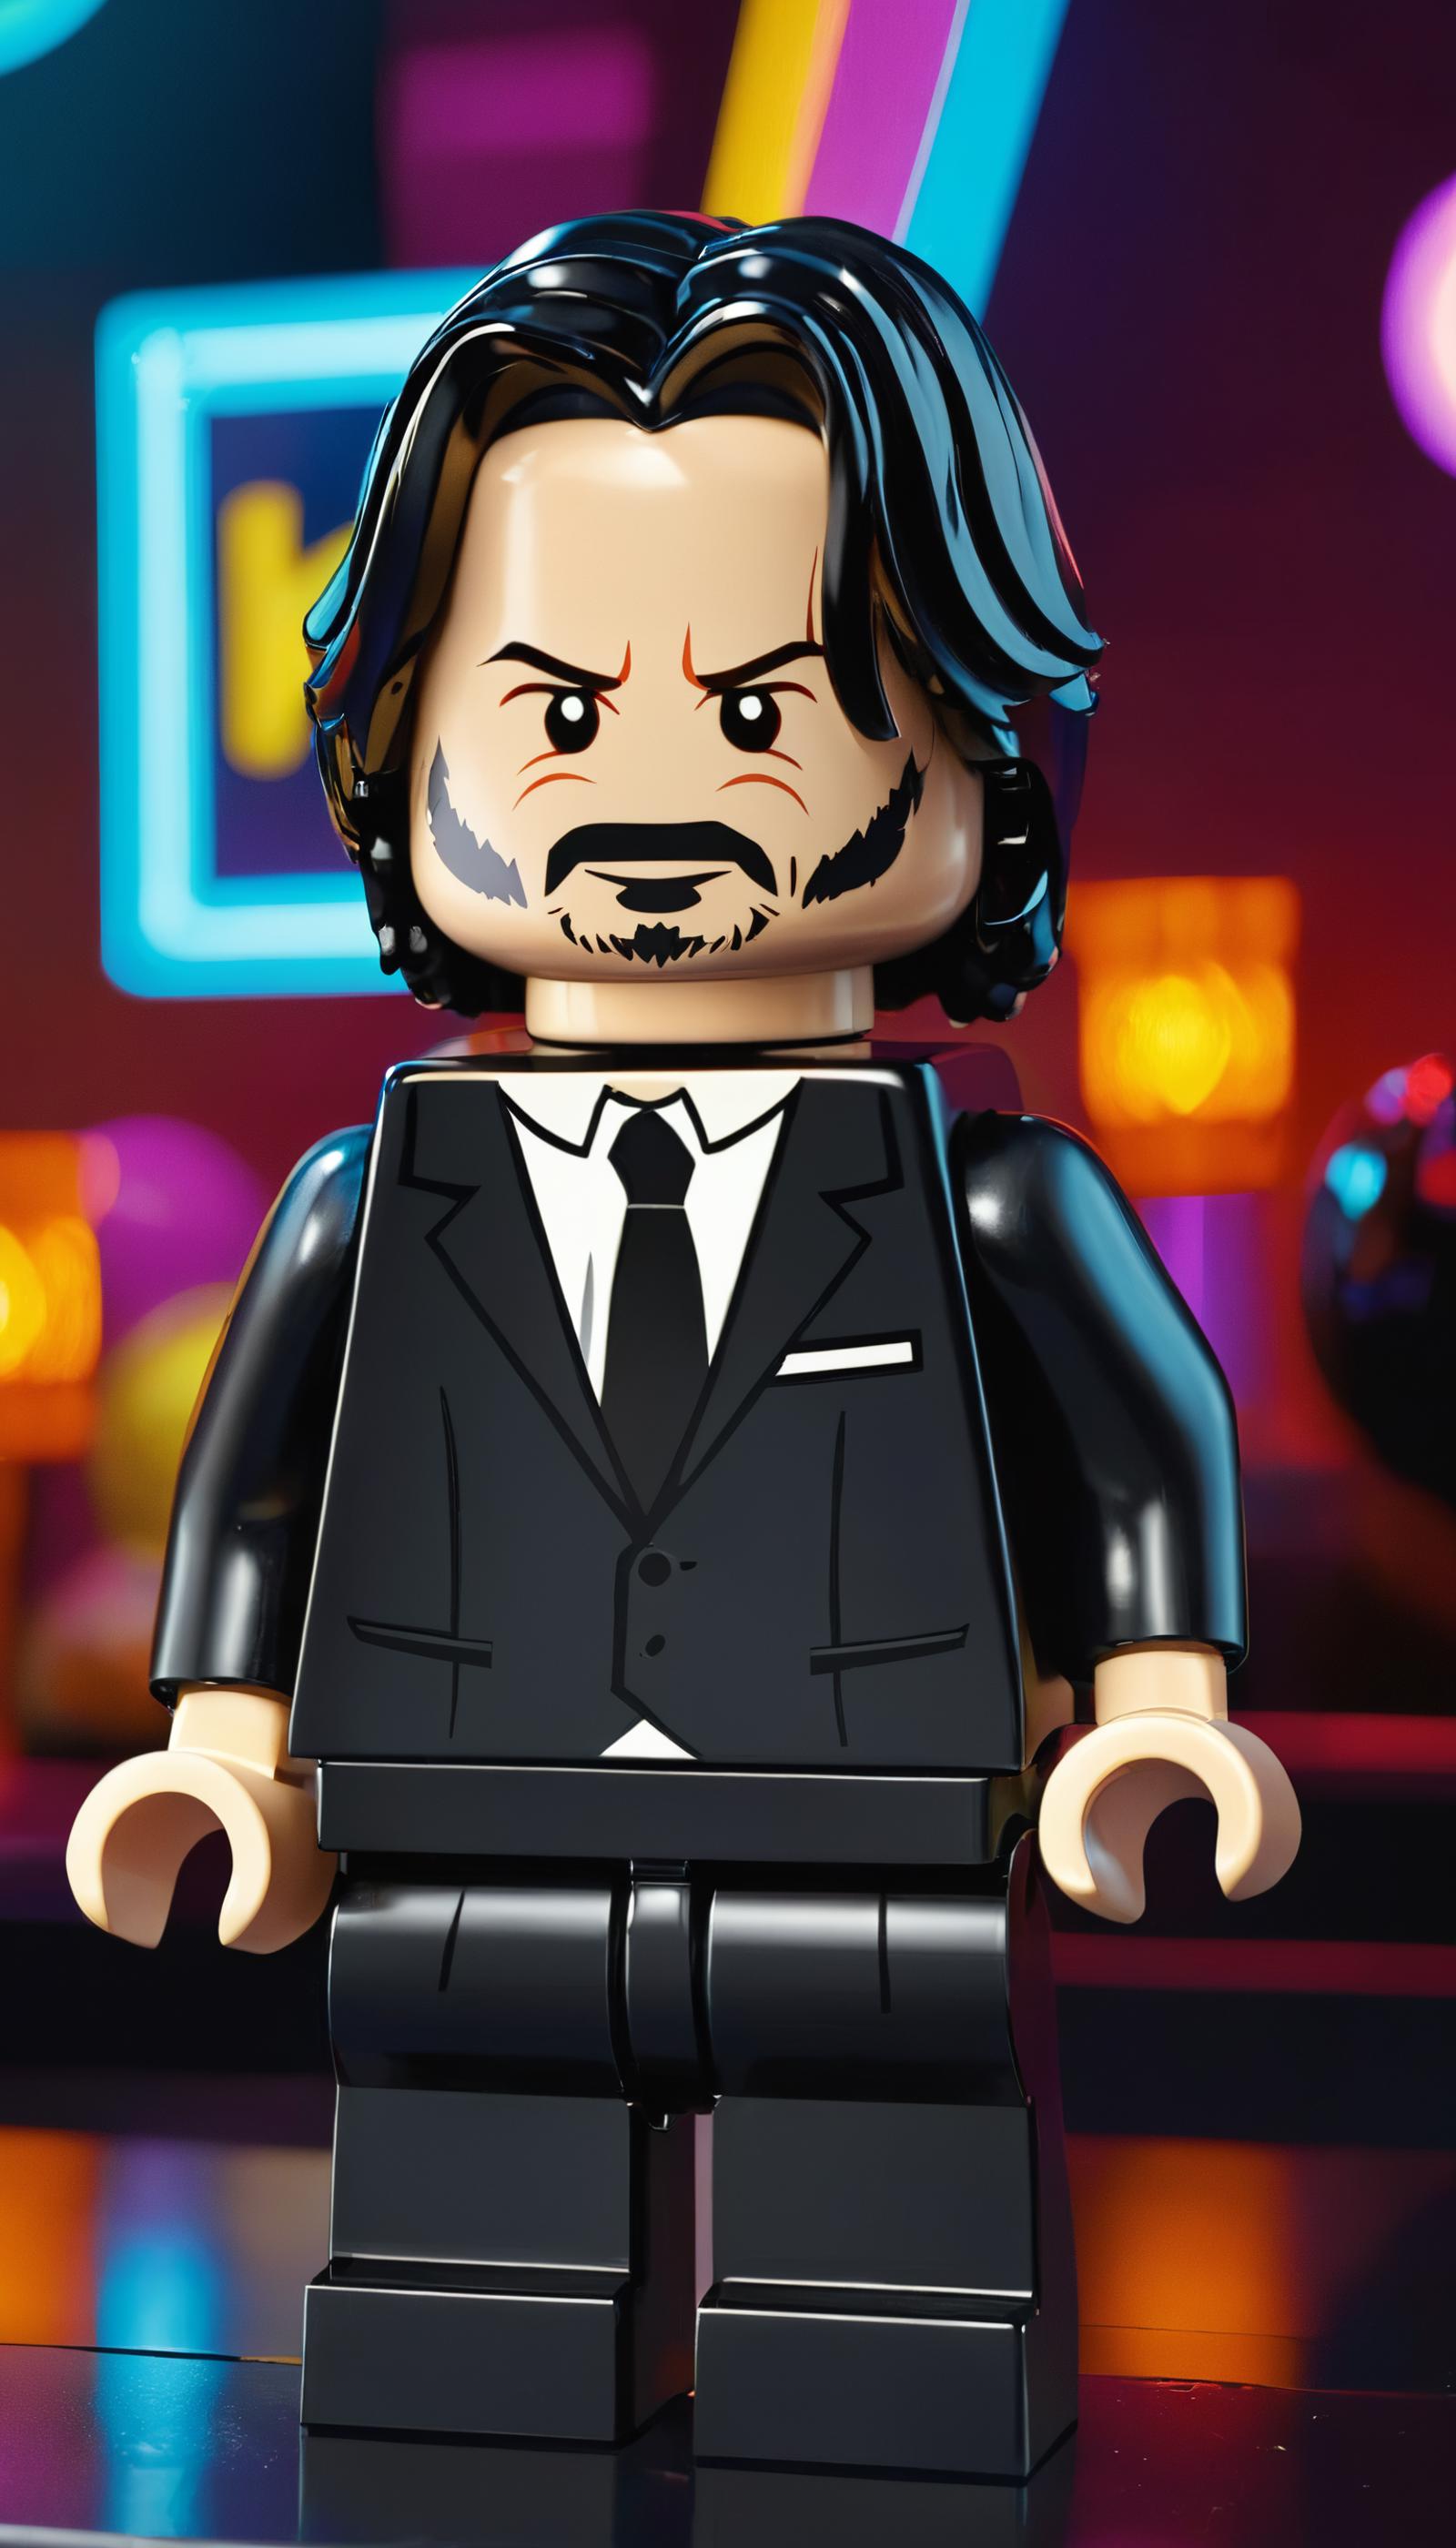 A Lego figure of a man in a suit and tie.